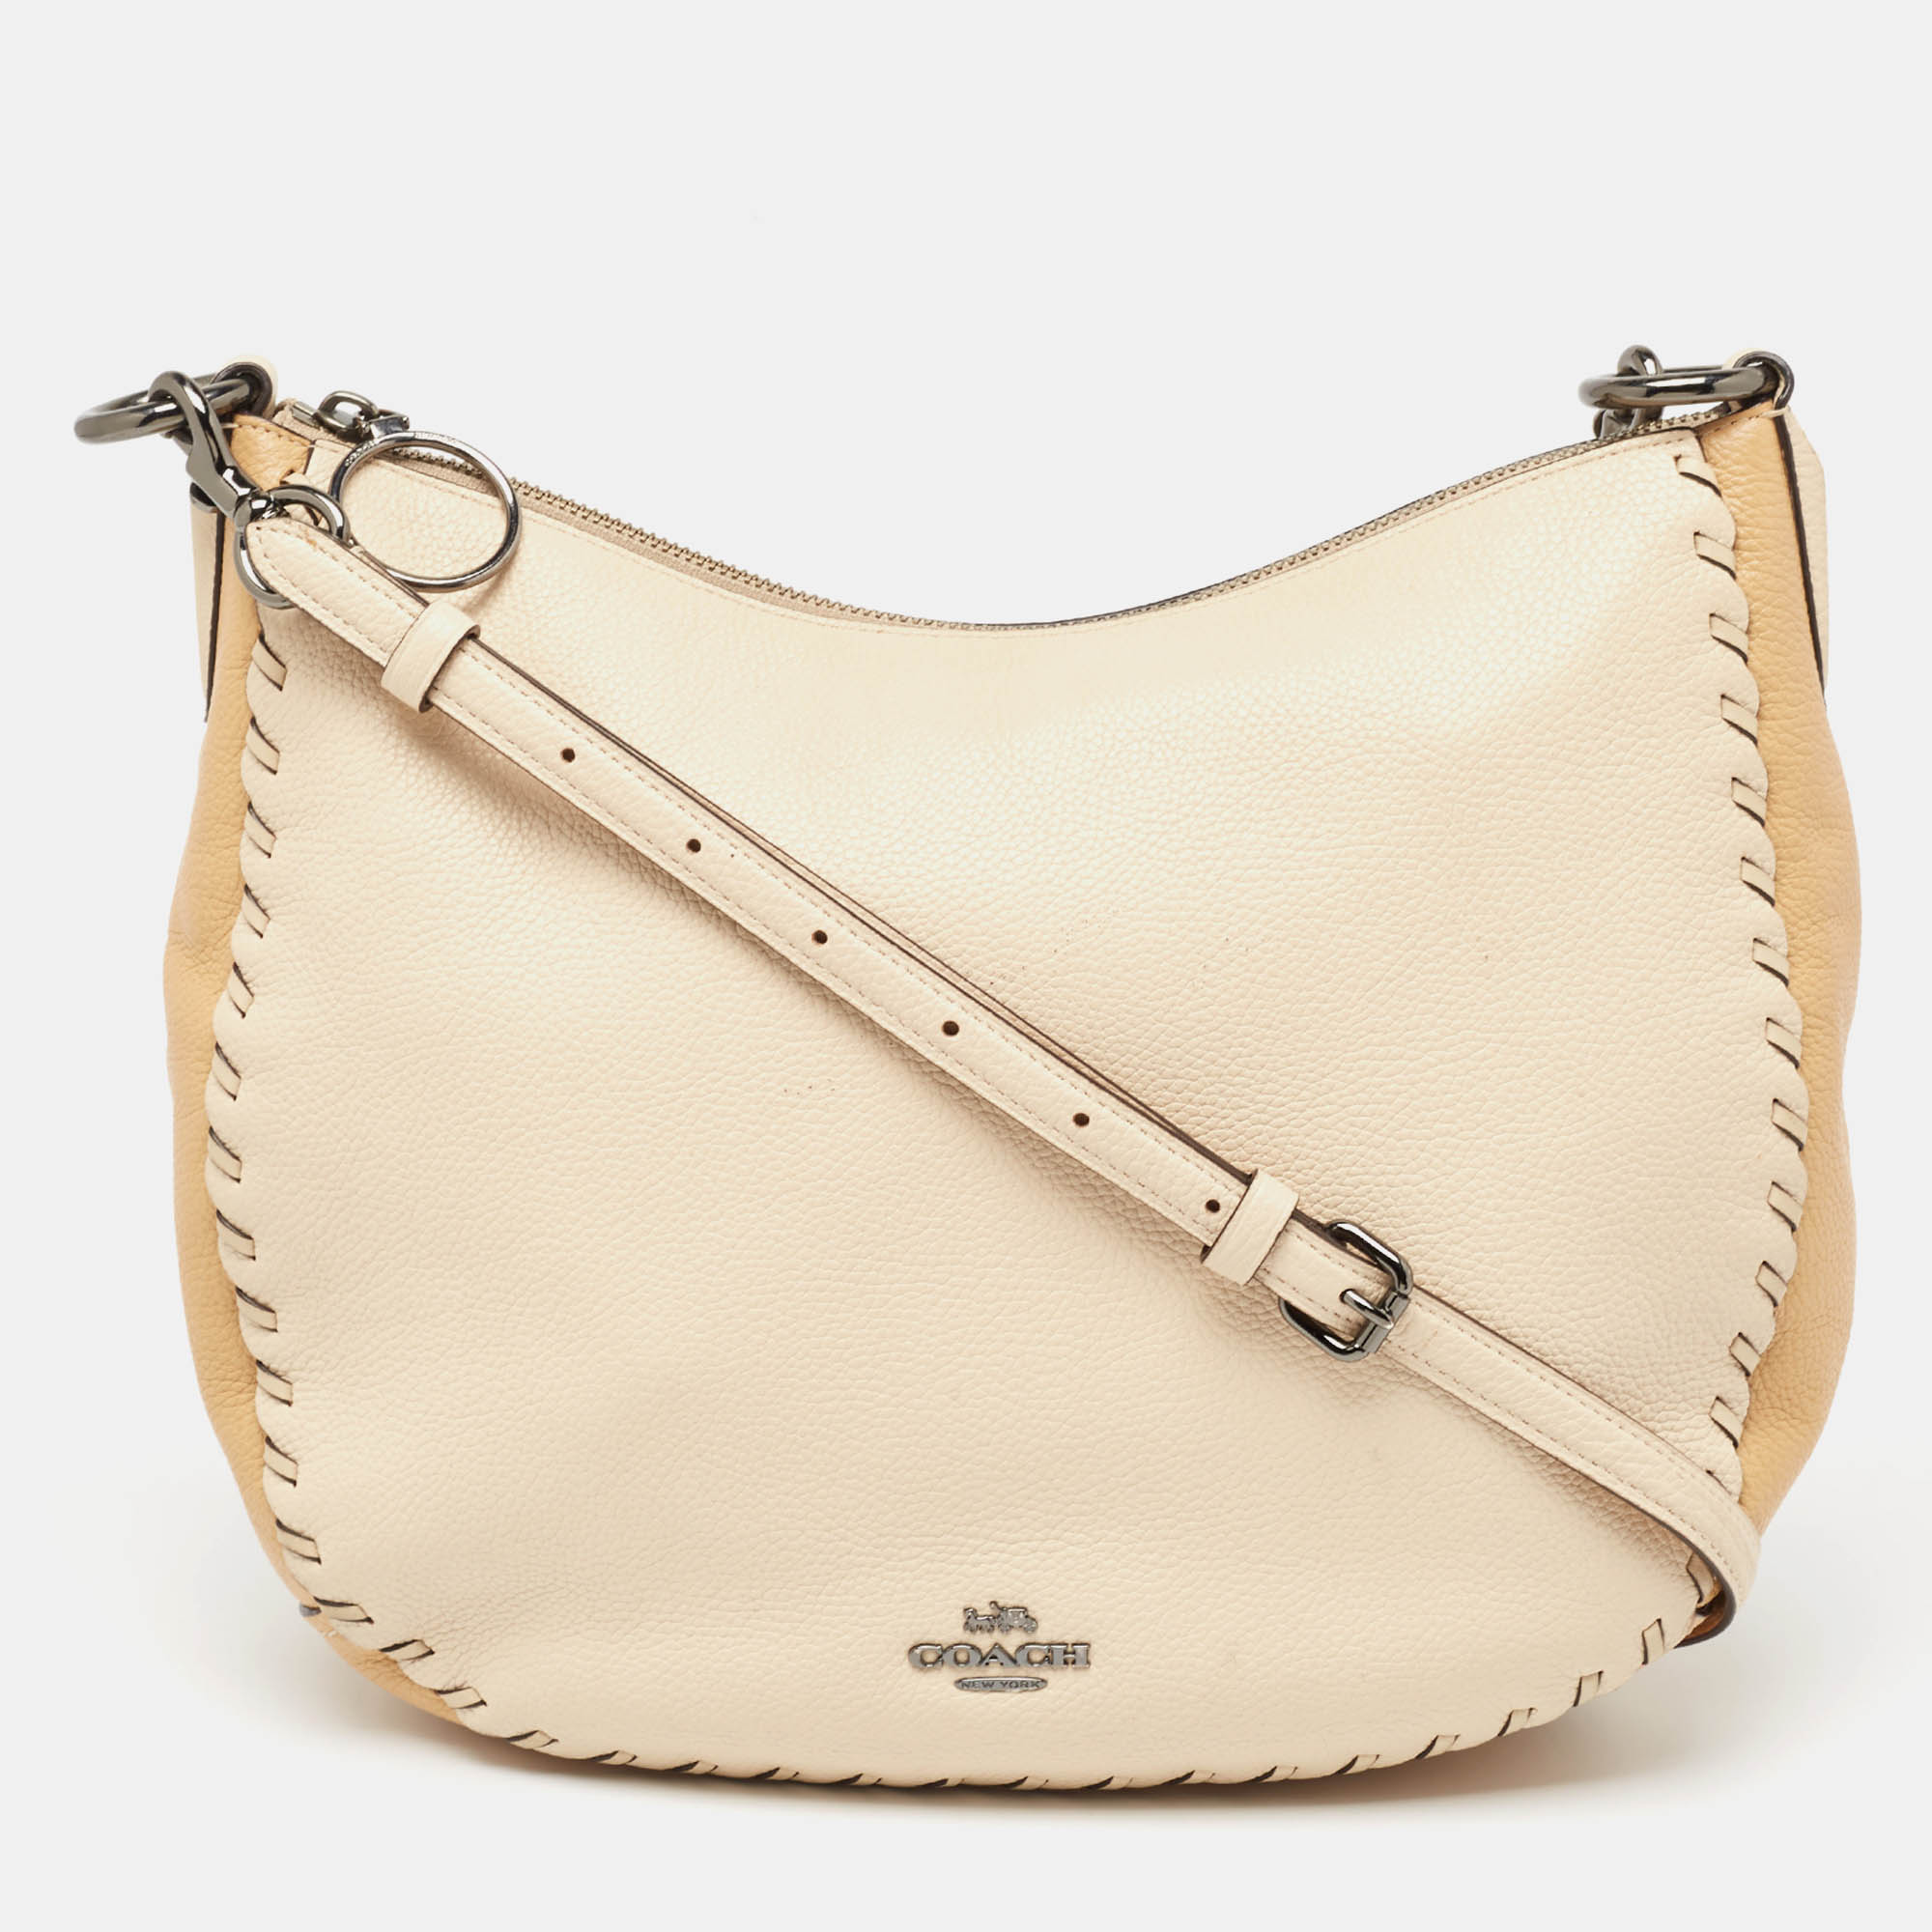 Visually alluring and finely crafted is this Sutton hobo made from beige leather. The bag has the brand detailing in gunmetal tone on the front and a lined interior to safely hold your essentials. A great everyday option this Coach bag is surely a must have